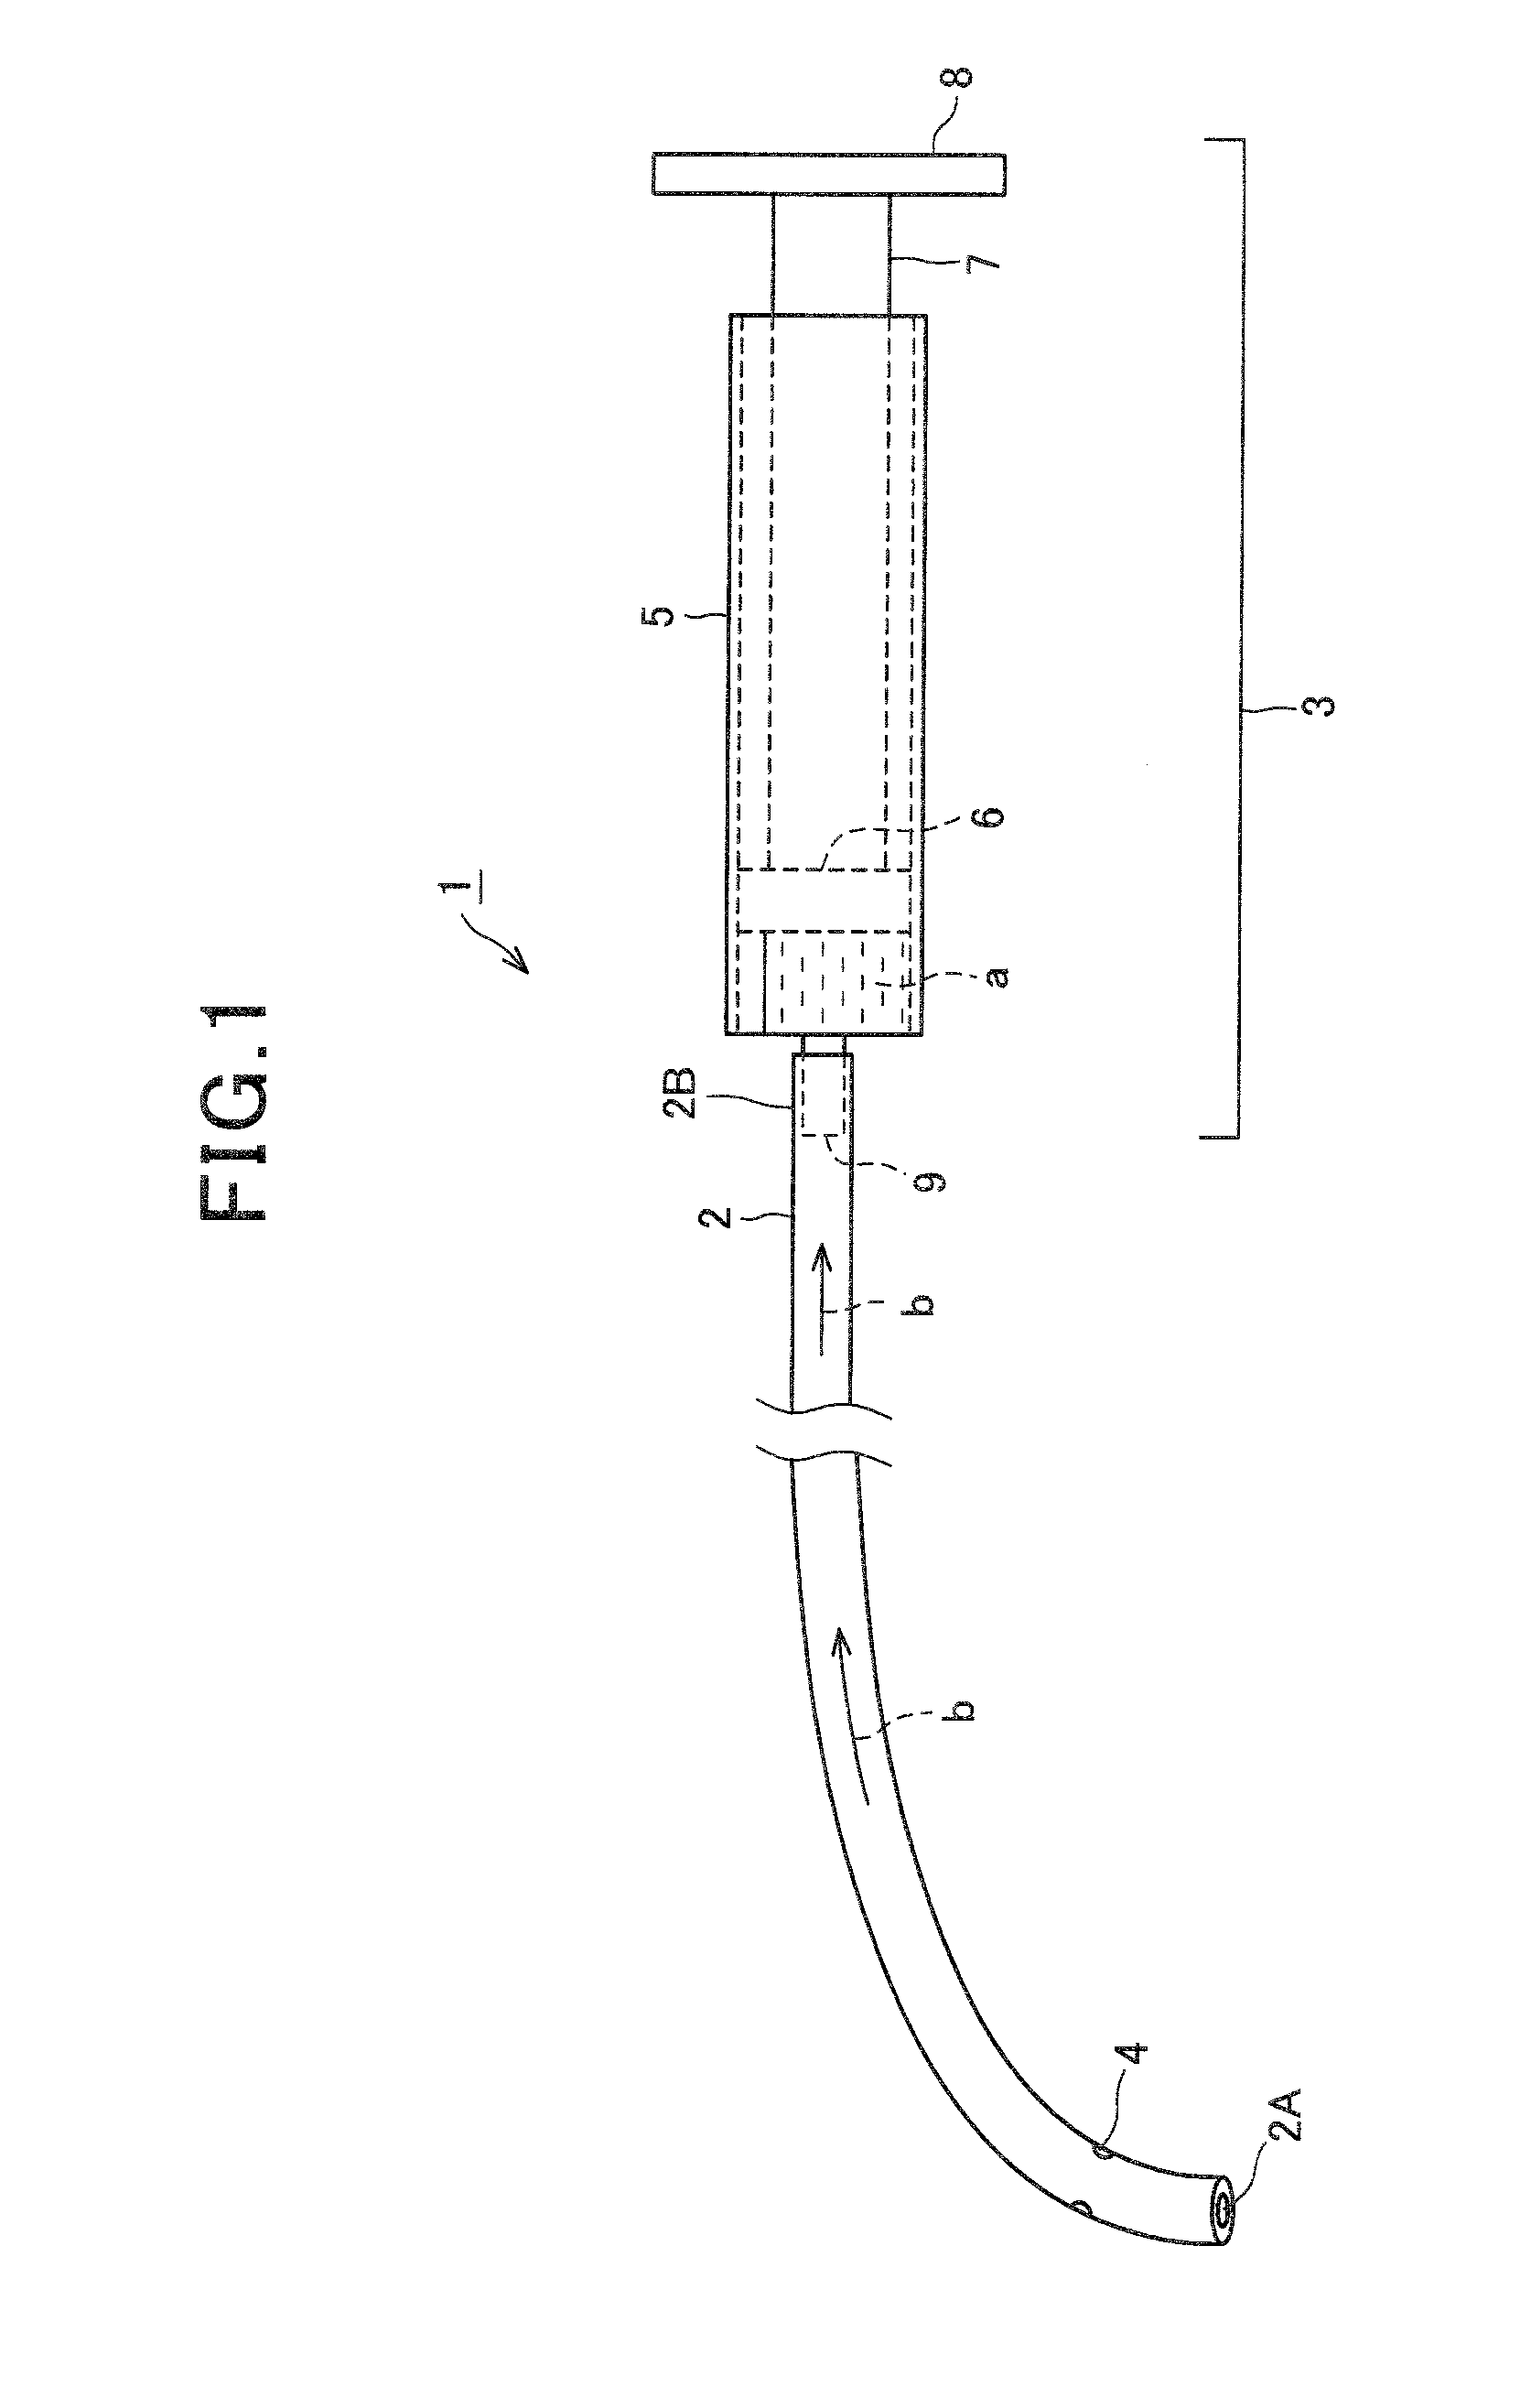 Method of collecting specimen and method of diagnosing subject to detect upper digestive system disease